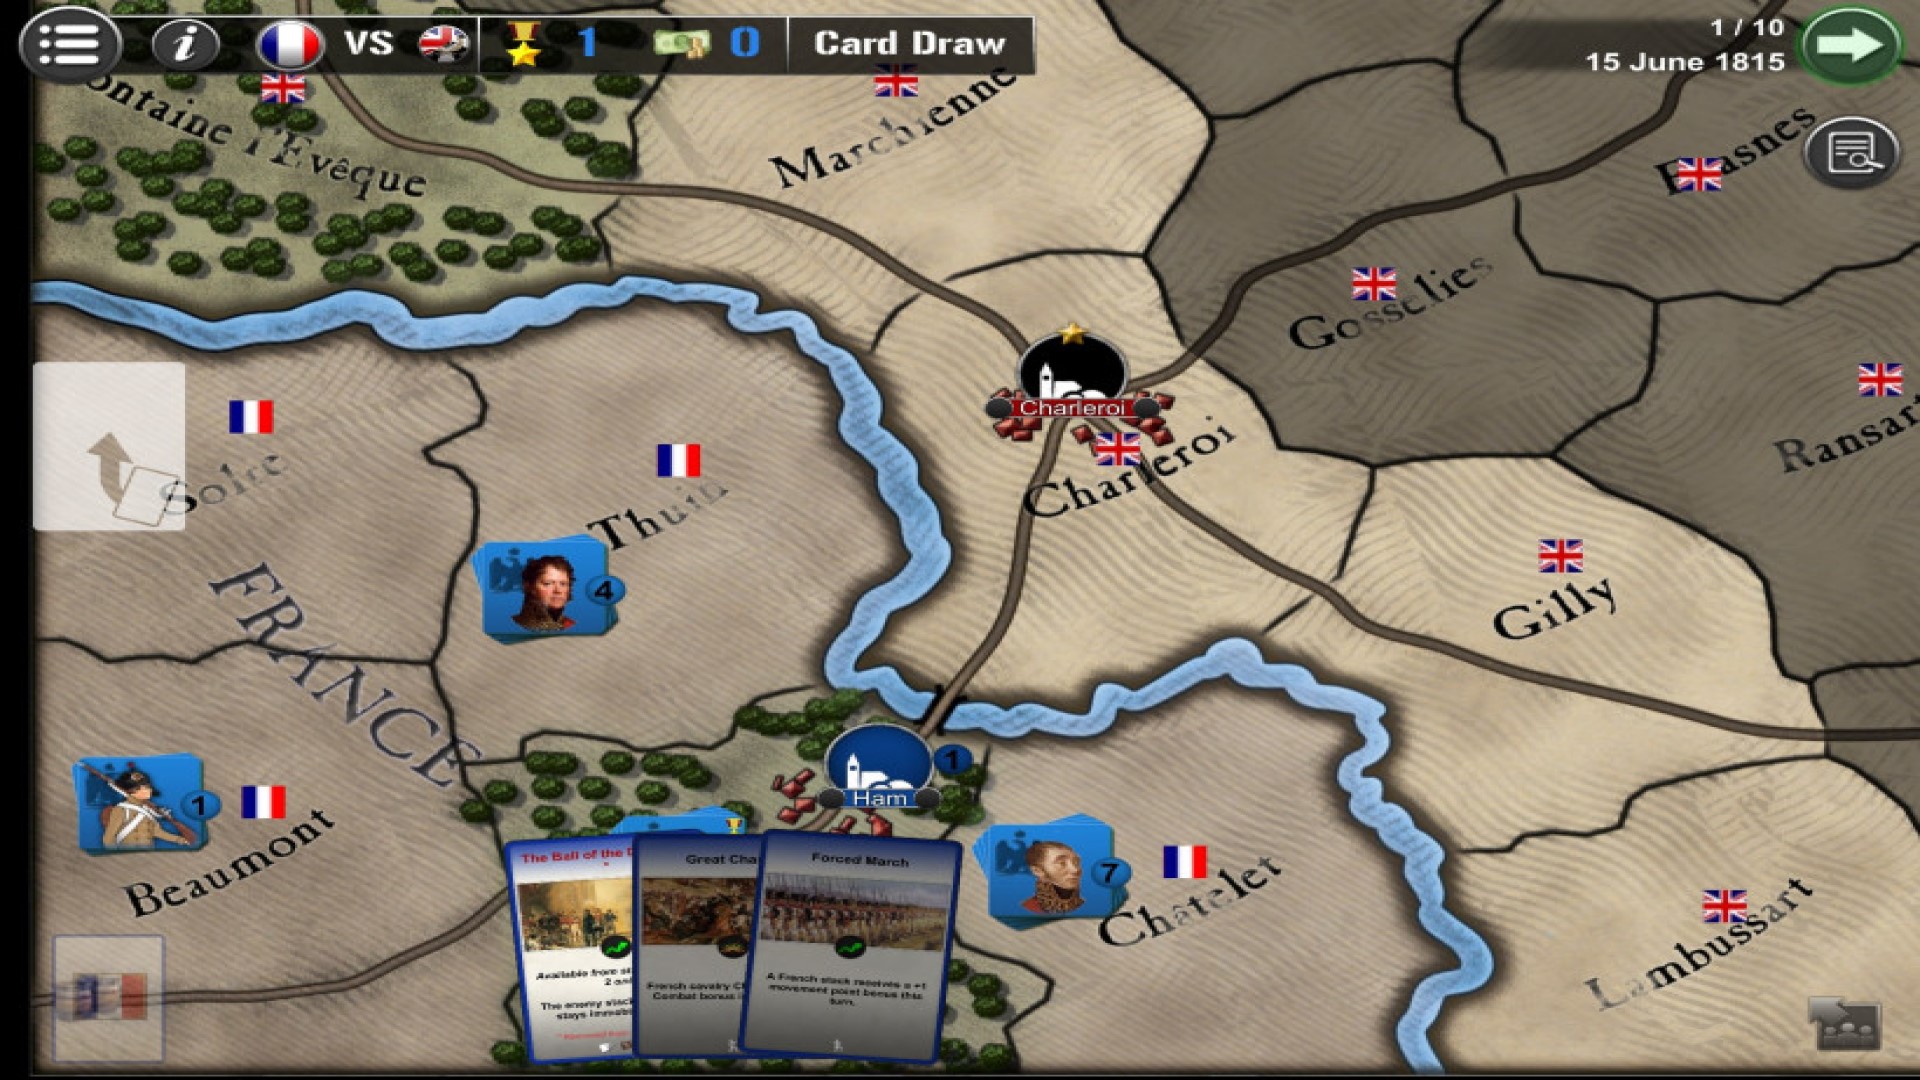 Best mobile war games: Wars Across the World. Image shows a map of a portion of England, with the player holding several cards that present options.